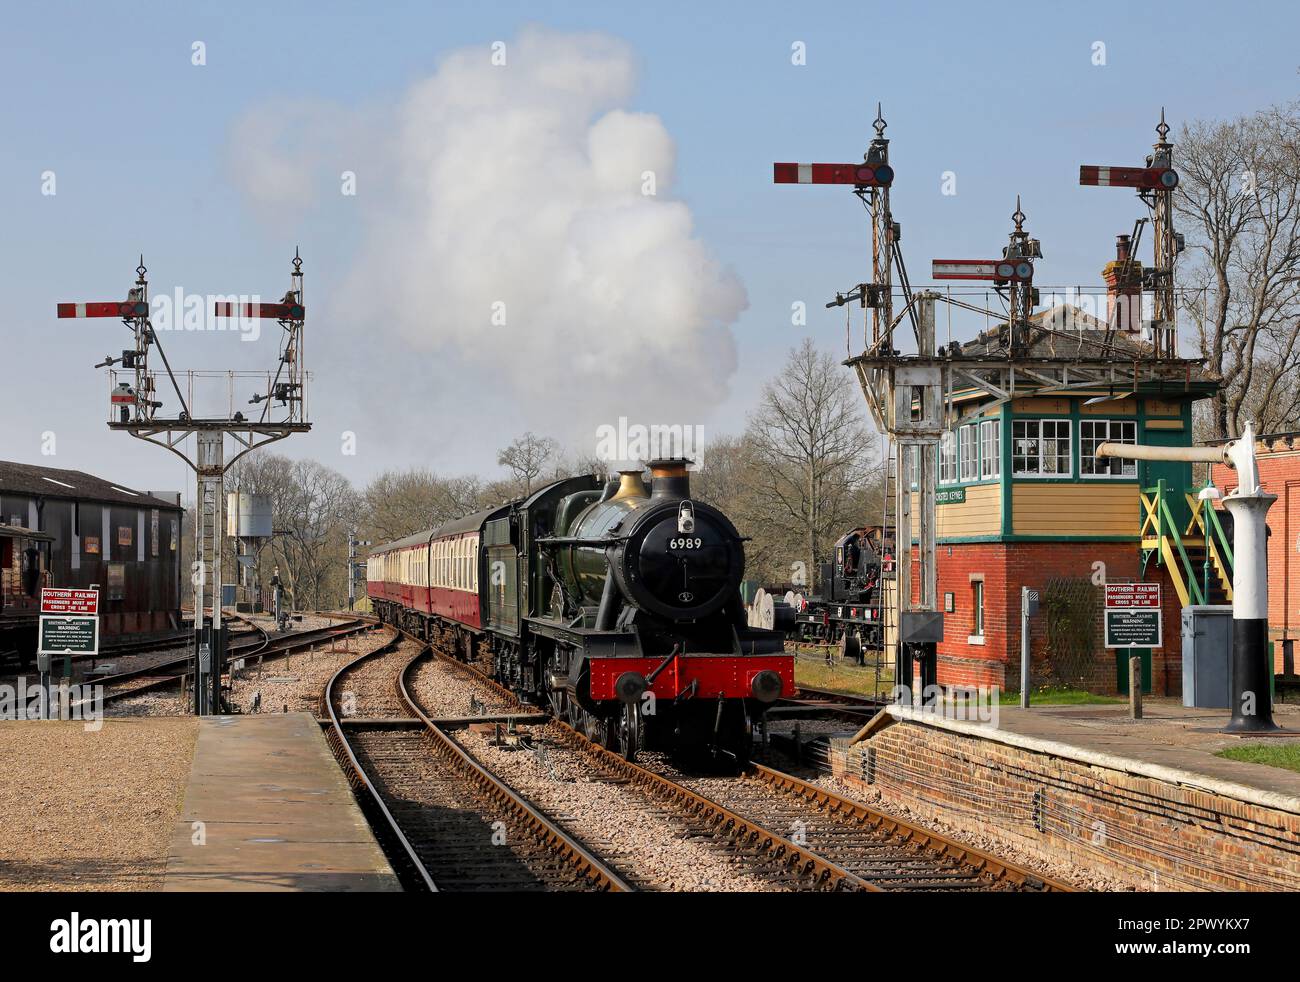 6989 arriva a Horsted Keynes il 17,4.23. Foto Stock